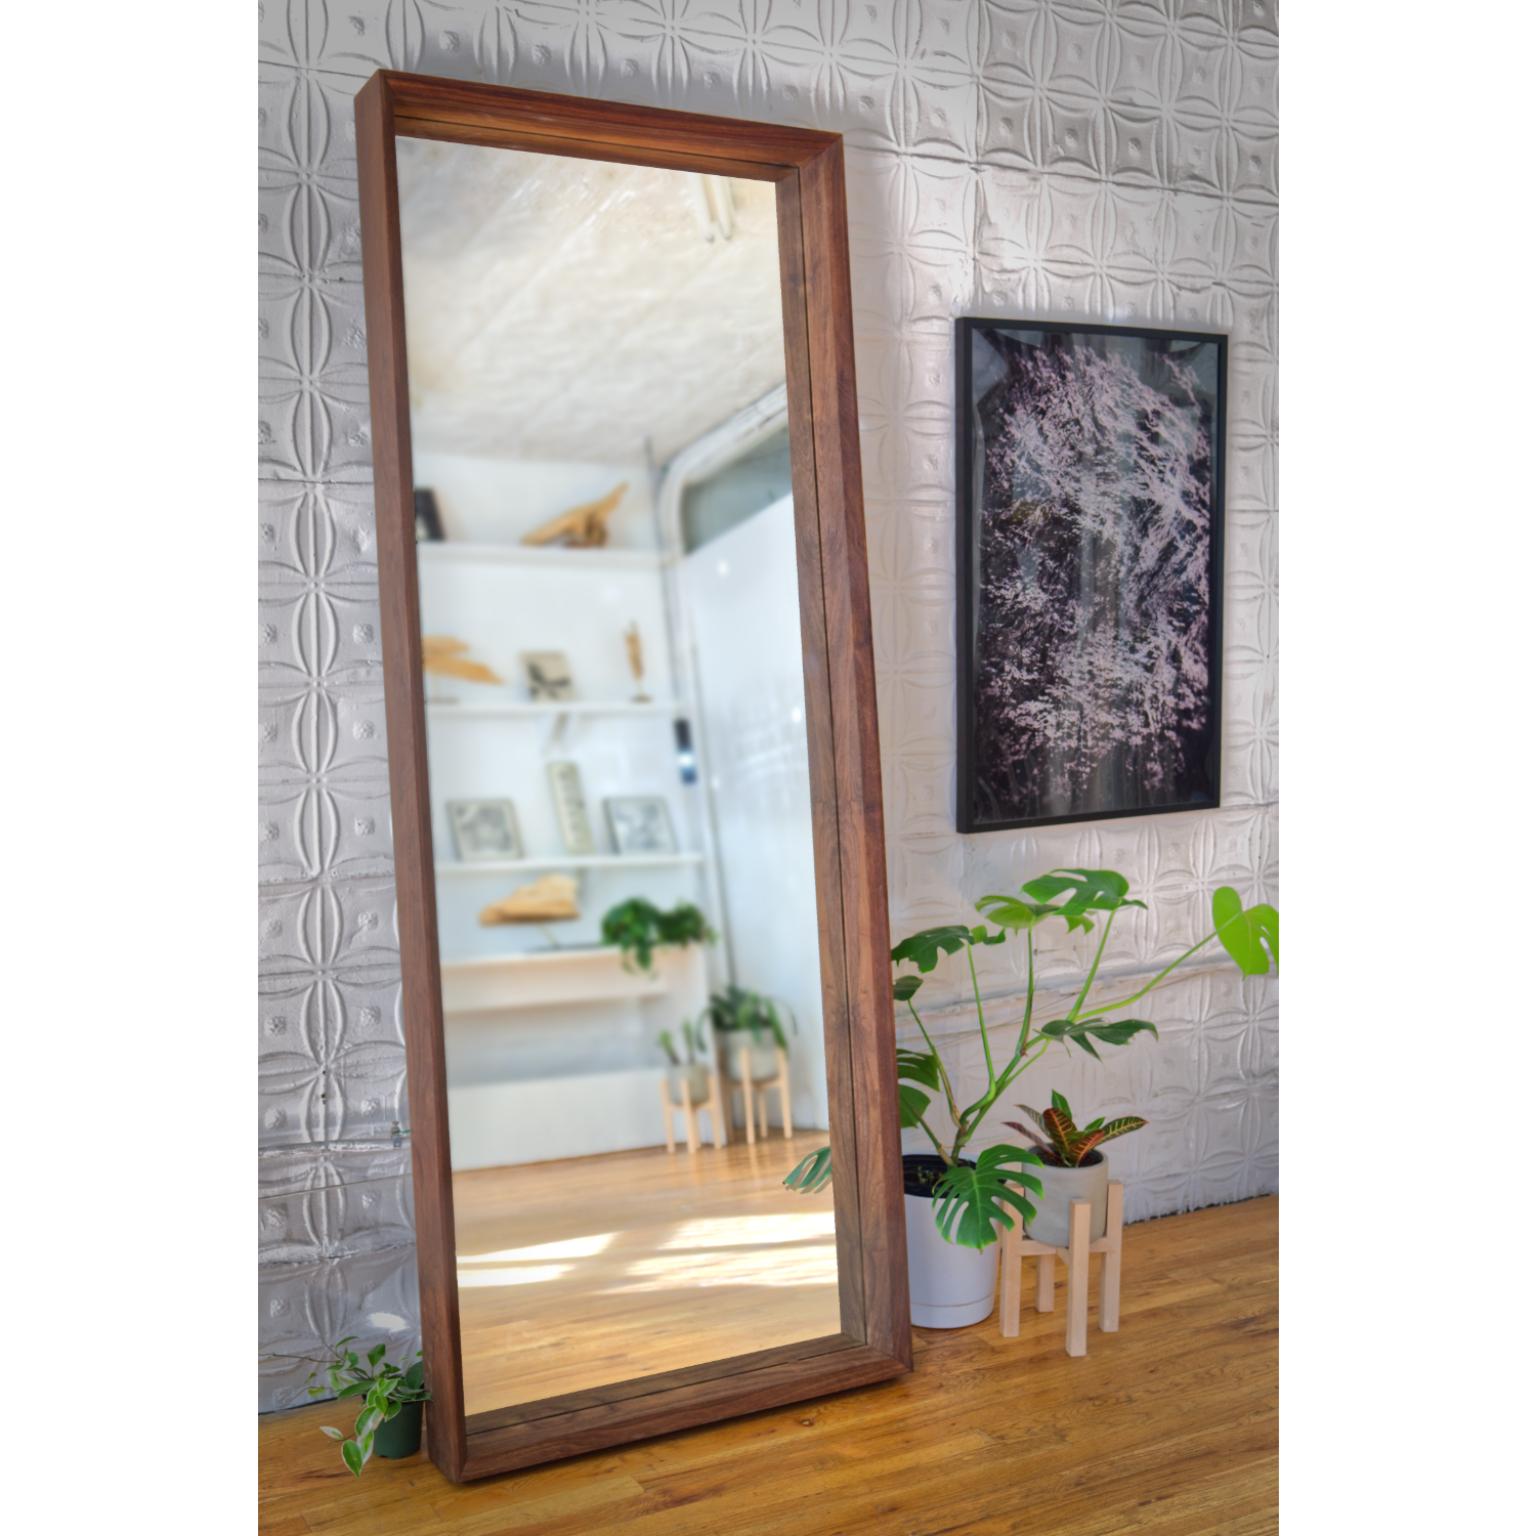 Constructed from solid American walnut, the mirror is a portal to another universe. Standing at 6’+ tall it doubles space and stands at your favorite wall for the creation of the day's outfit and beyond. The frame on this mirror double chamfers for